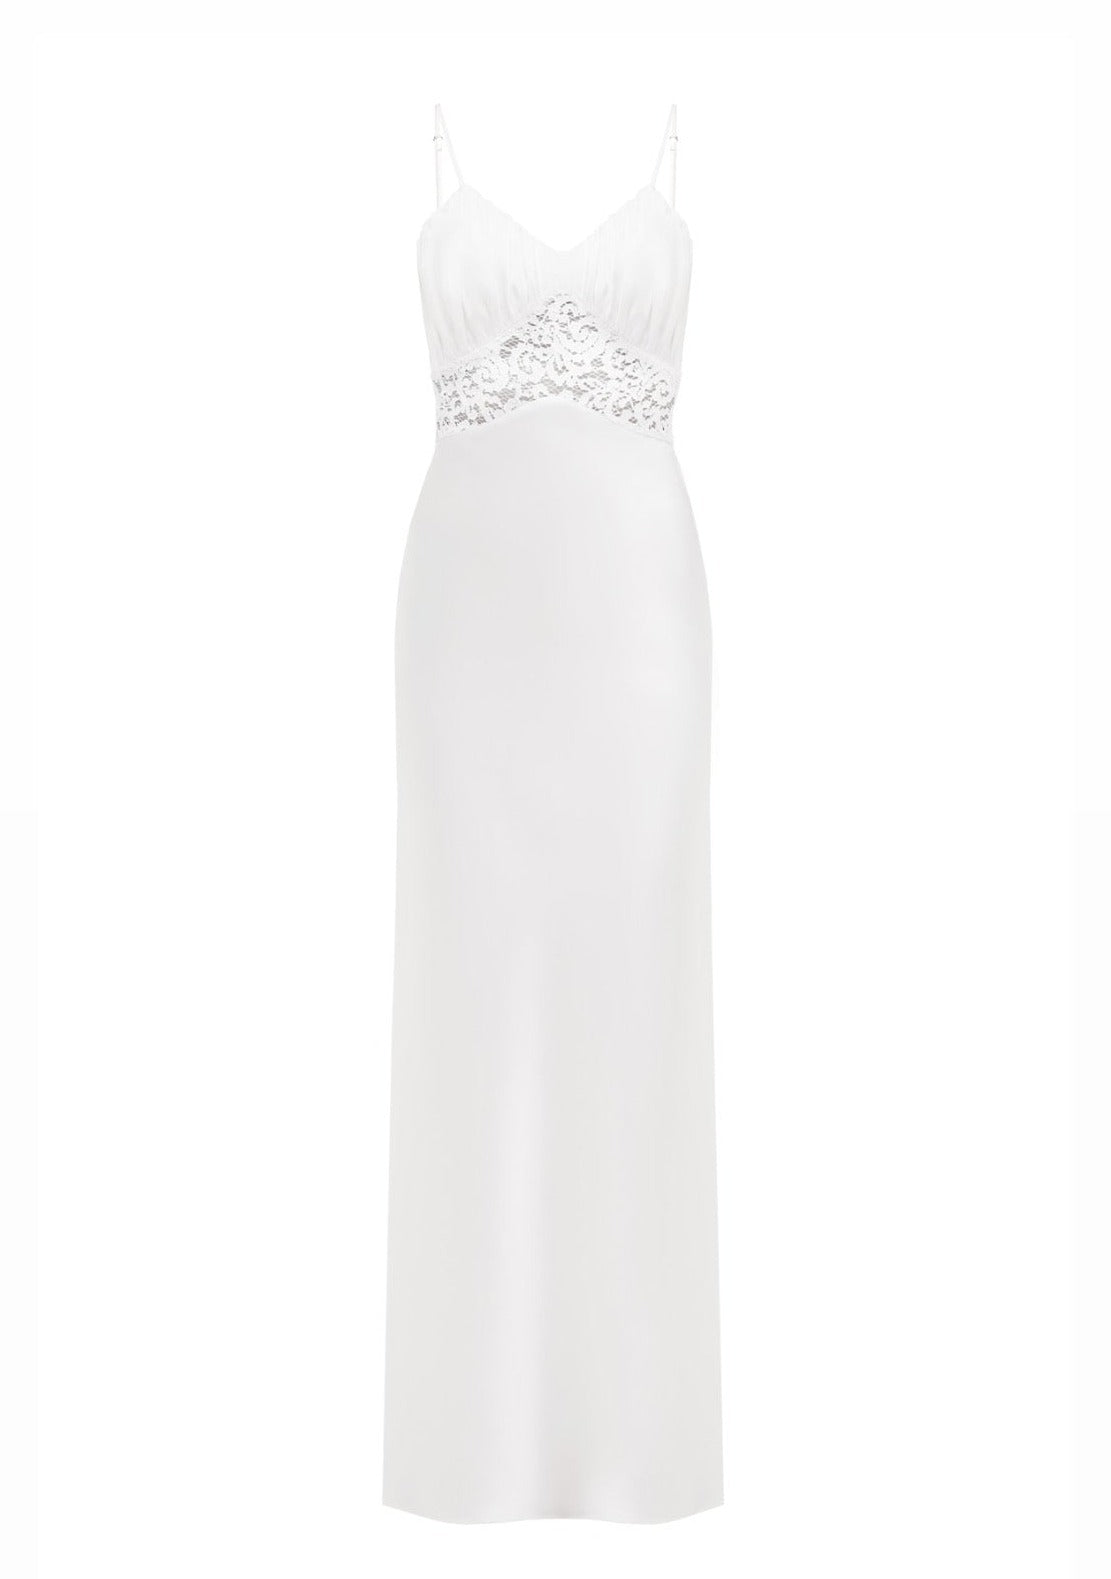 Long white satin dress with lace